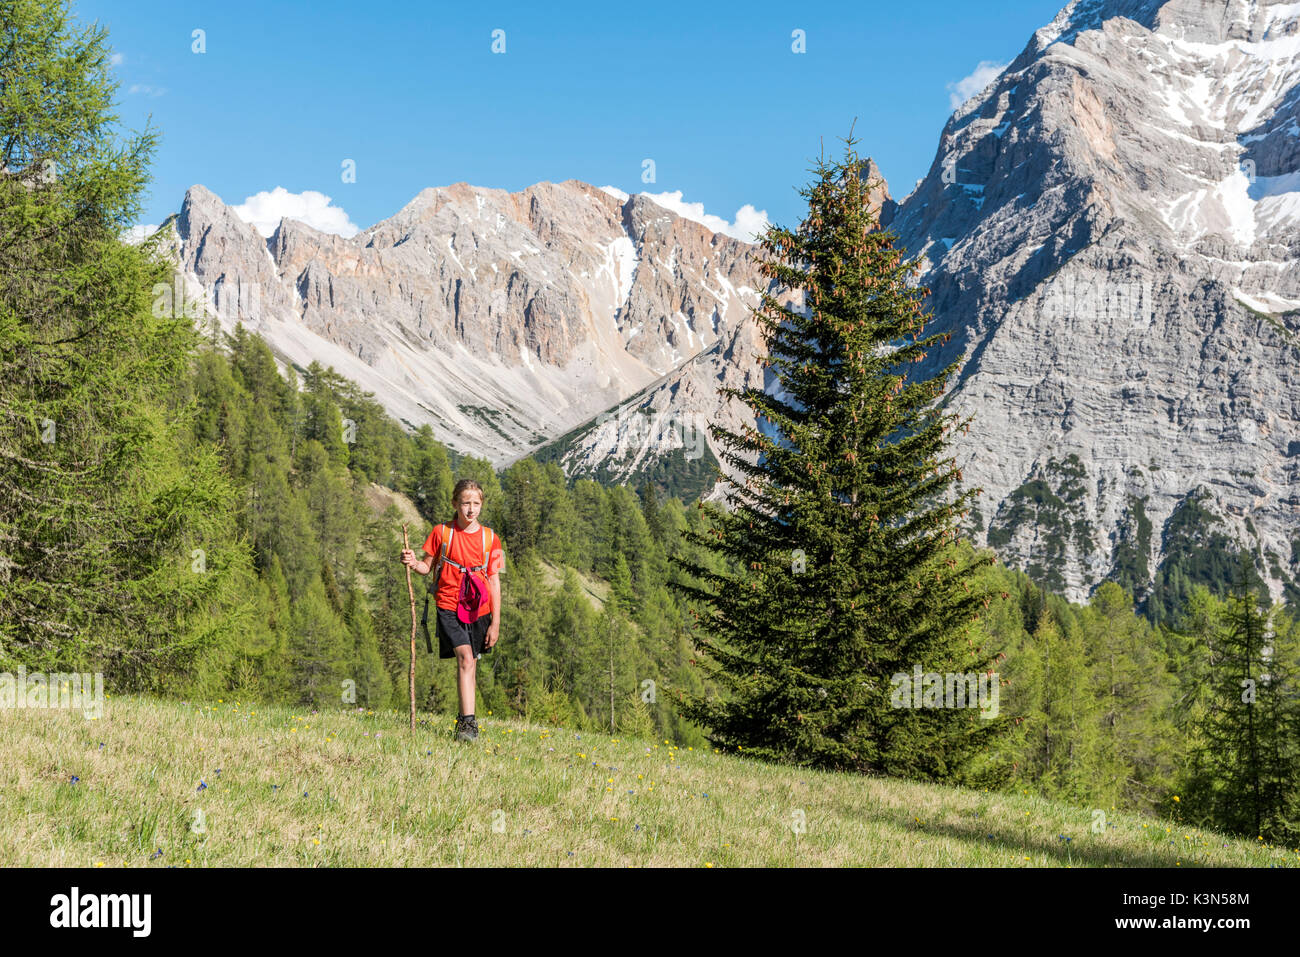 La Valle / Wengen, Alta Badia, Bolzano province, South Tyrol, Italy. Young hiker traveling on the pastures of Pra de Rit Stock Photo